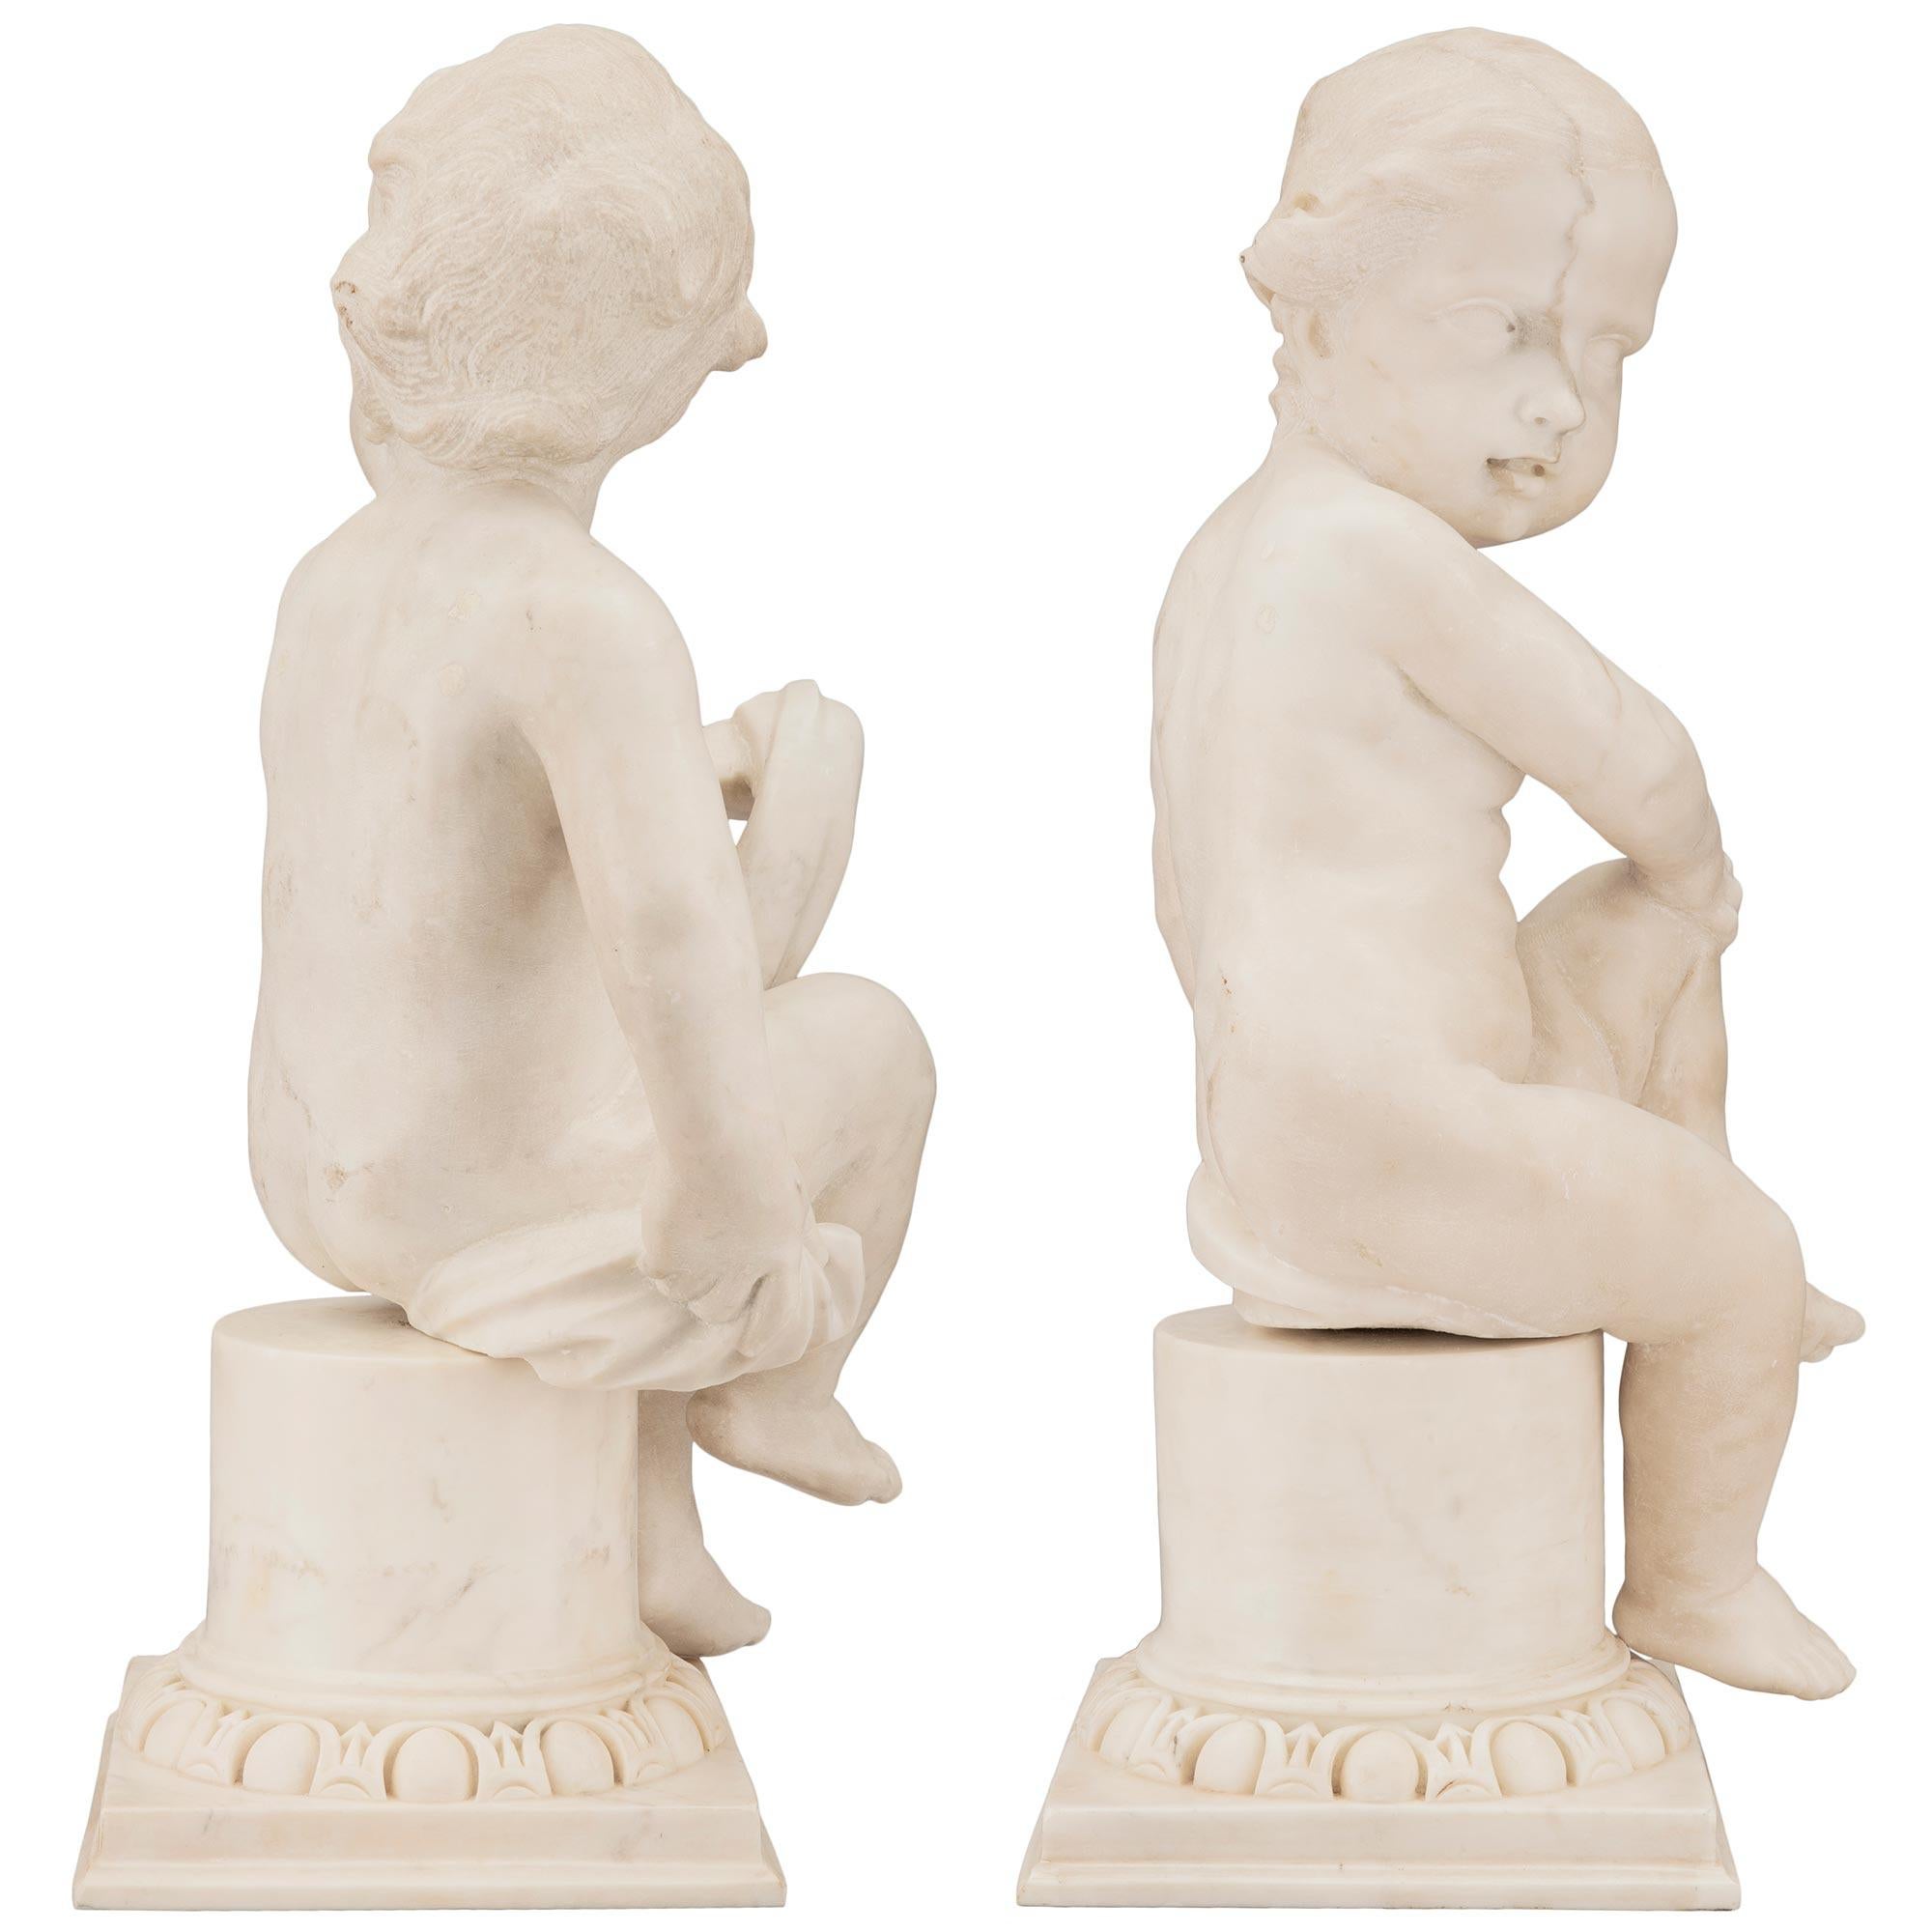 Pair of Italian 18th Century Louis XVI Period White Carrara Marble Statues In Good Condition For Sale In West Palm Beach, FL